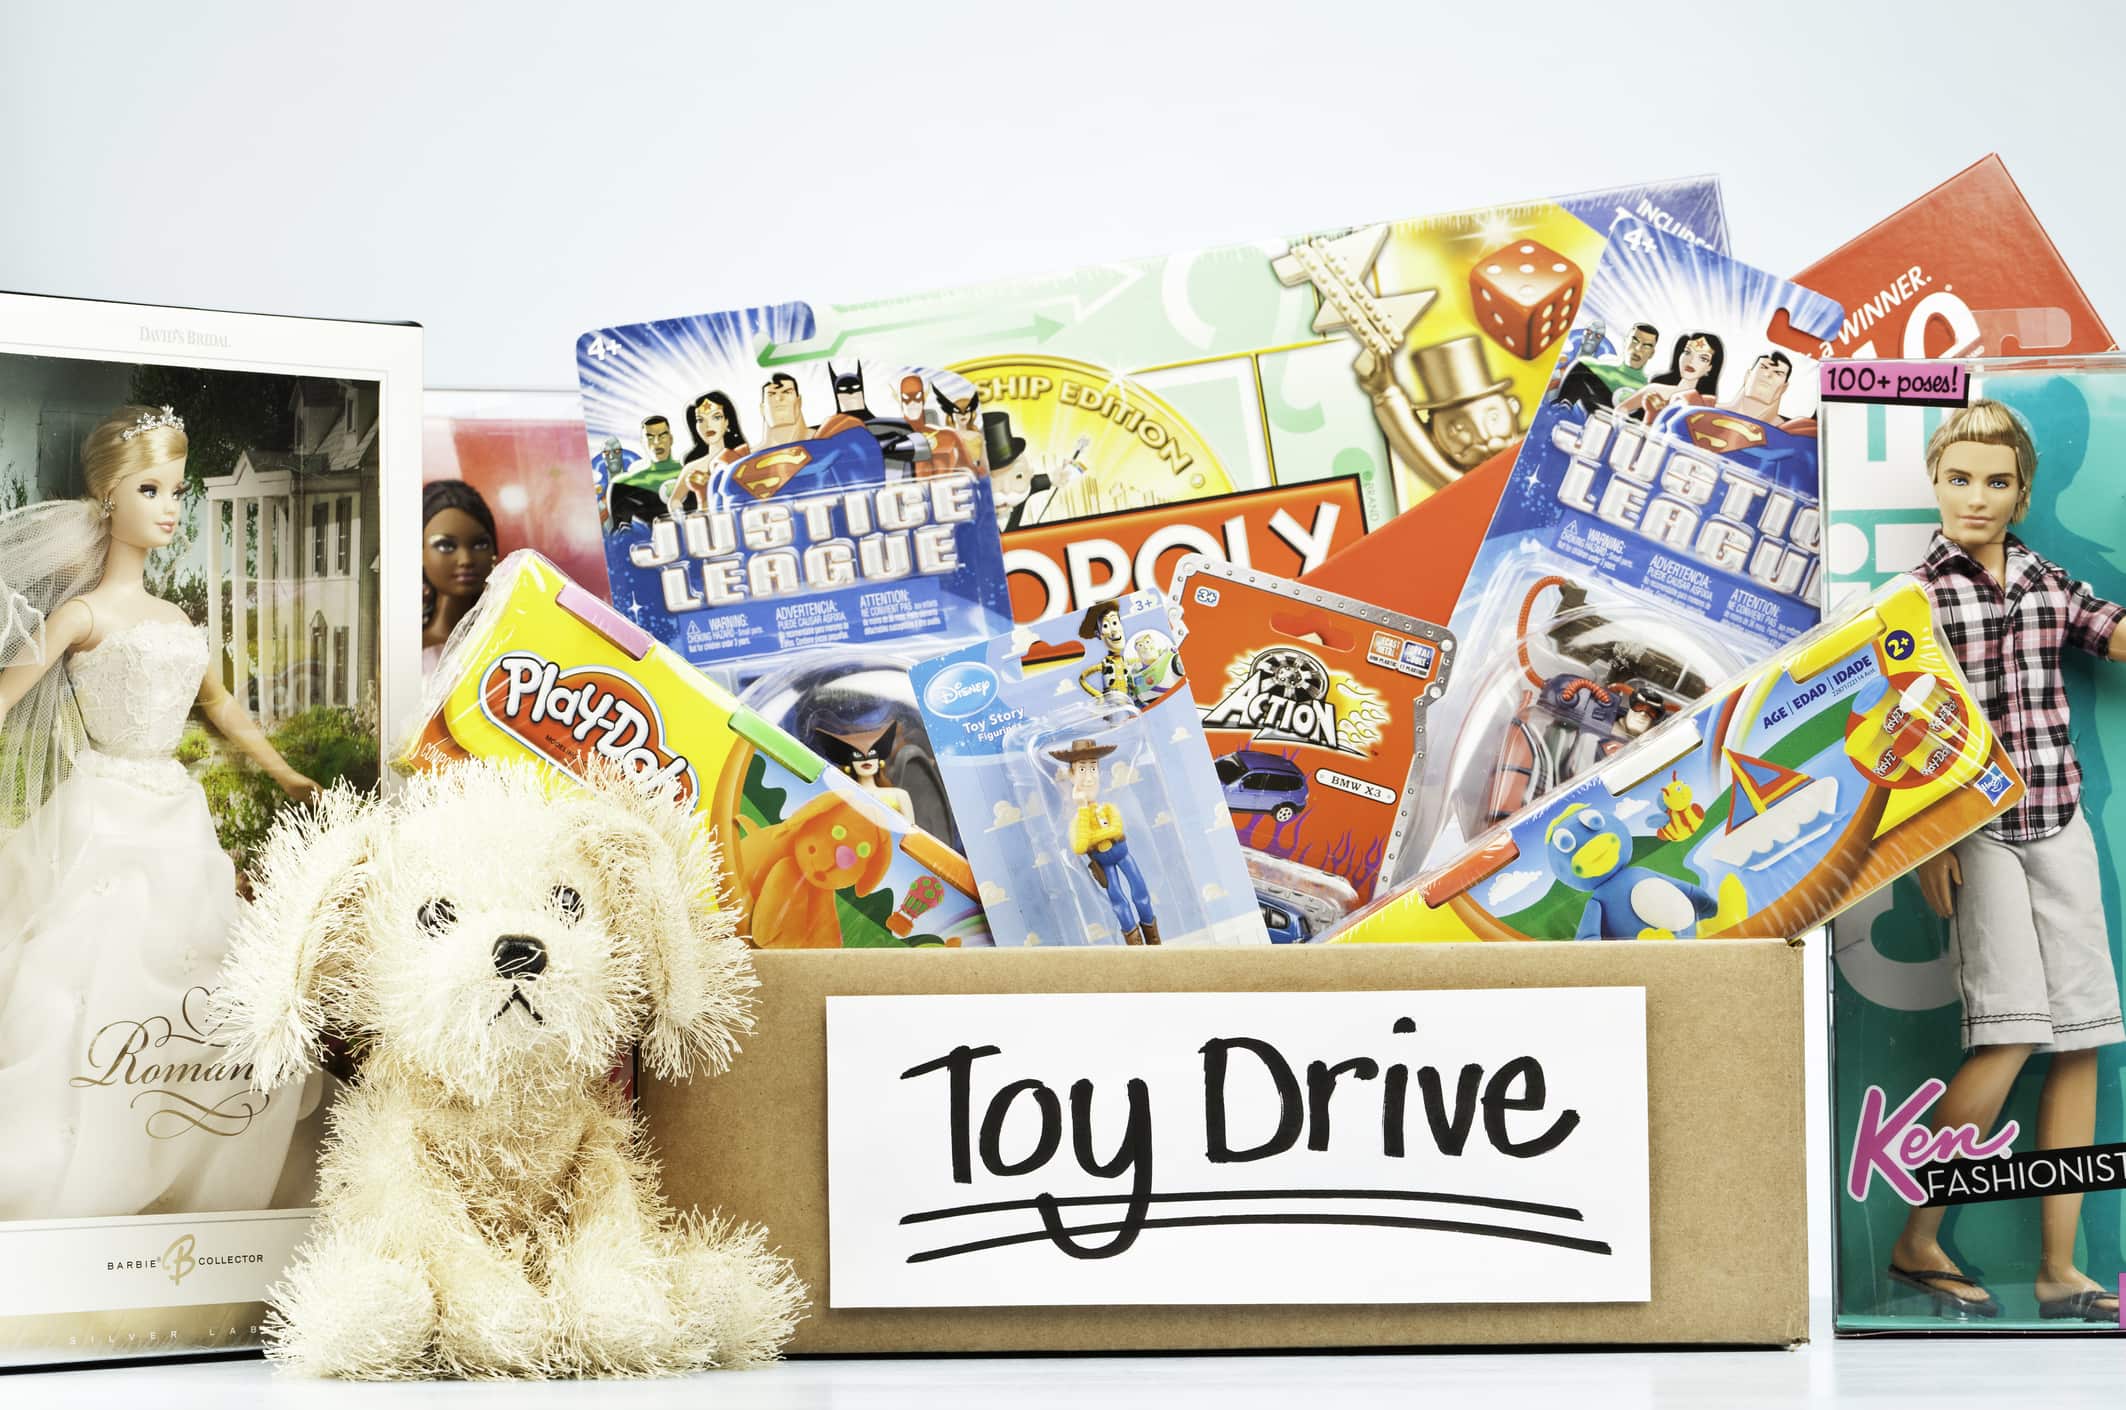 A large collection of toys and games in a cardboard box labelled for a holiday toy drive. Included in the box are Play-Doh, Justice League figurines, a Monopoly game, Scrabble game, a Disney Toy Story figurine, and an Action toy car. A cuddly toy dog sits in front of the box, and Barbie dolls and a Ken Fashionista doll flank the sides of the box.